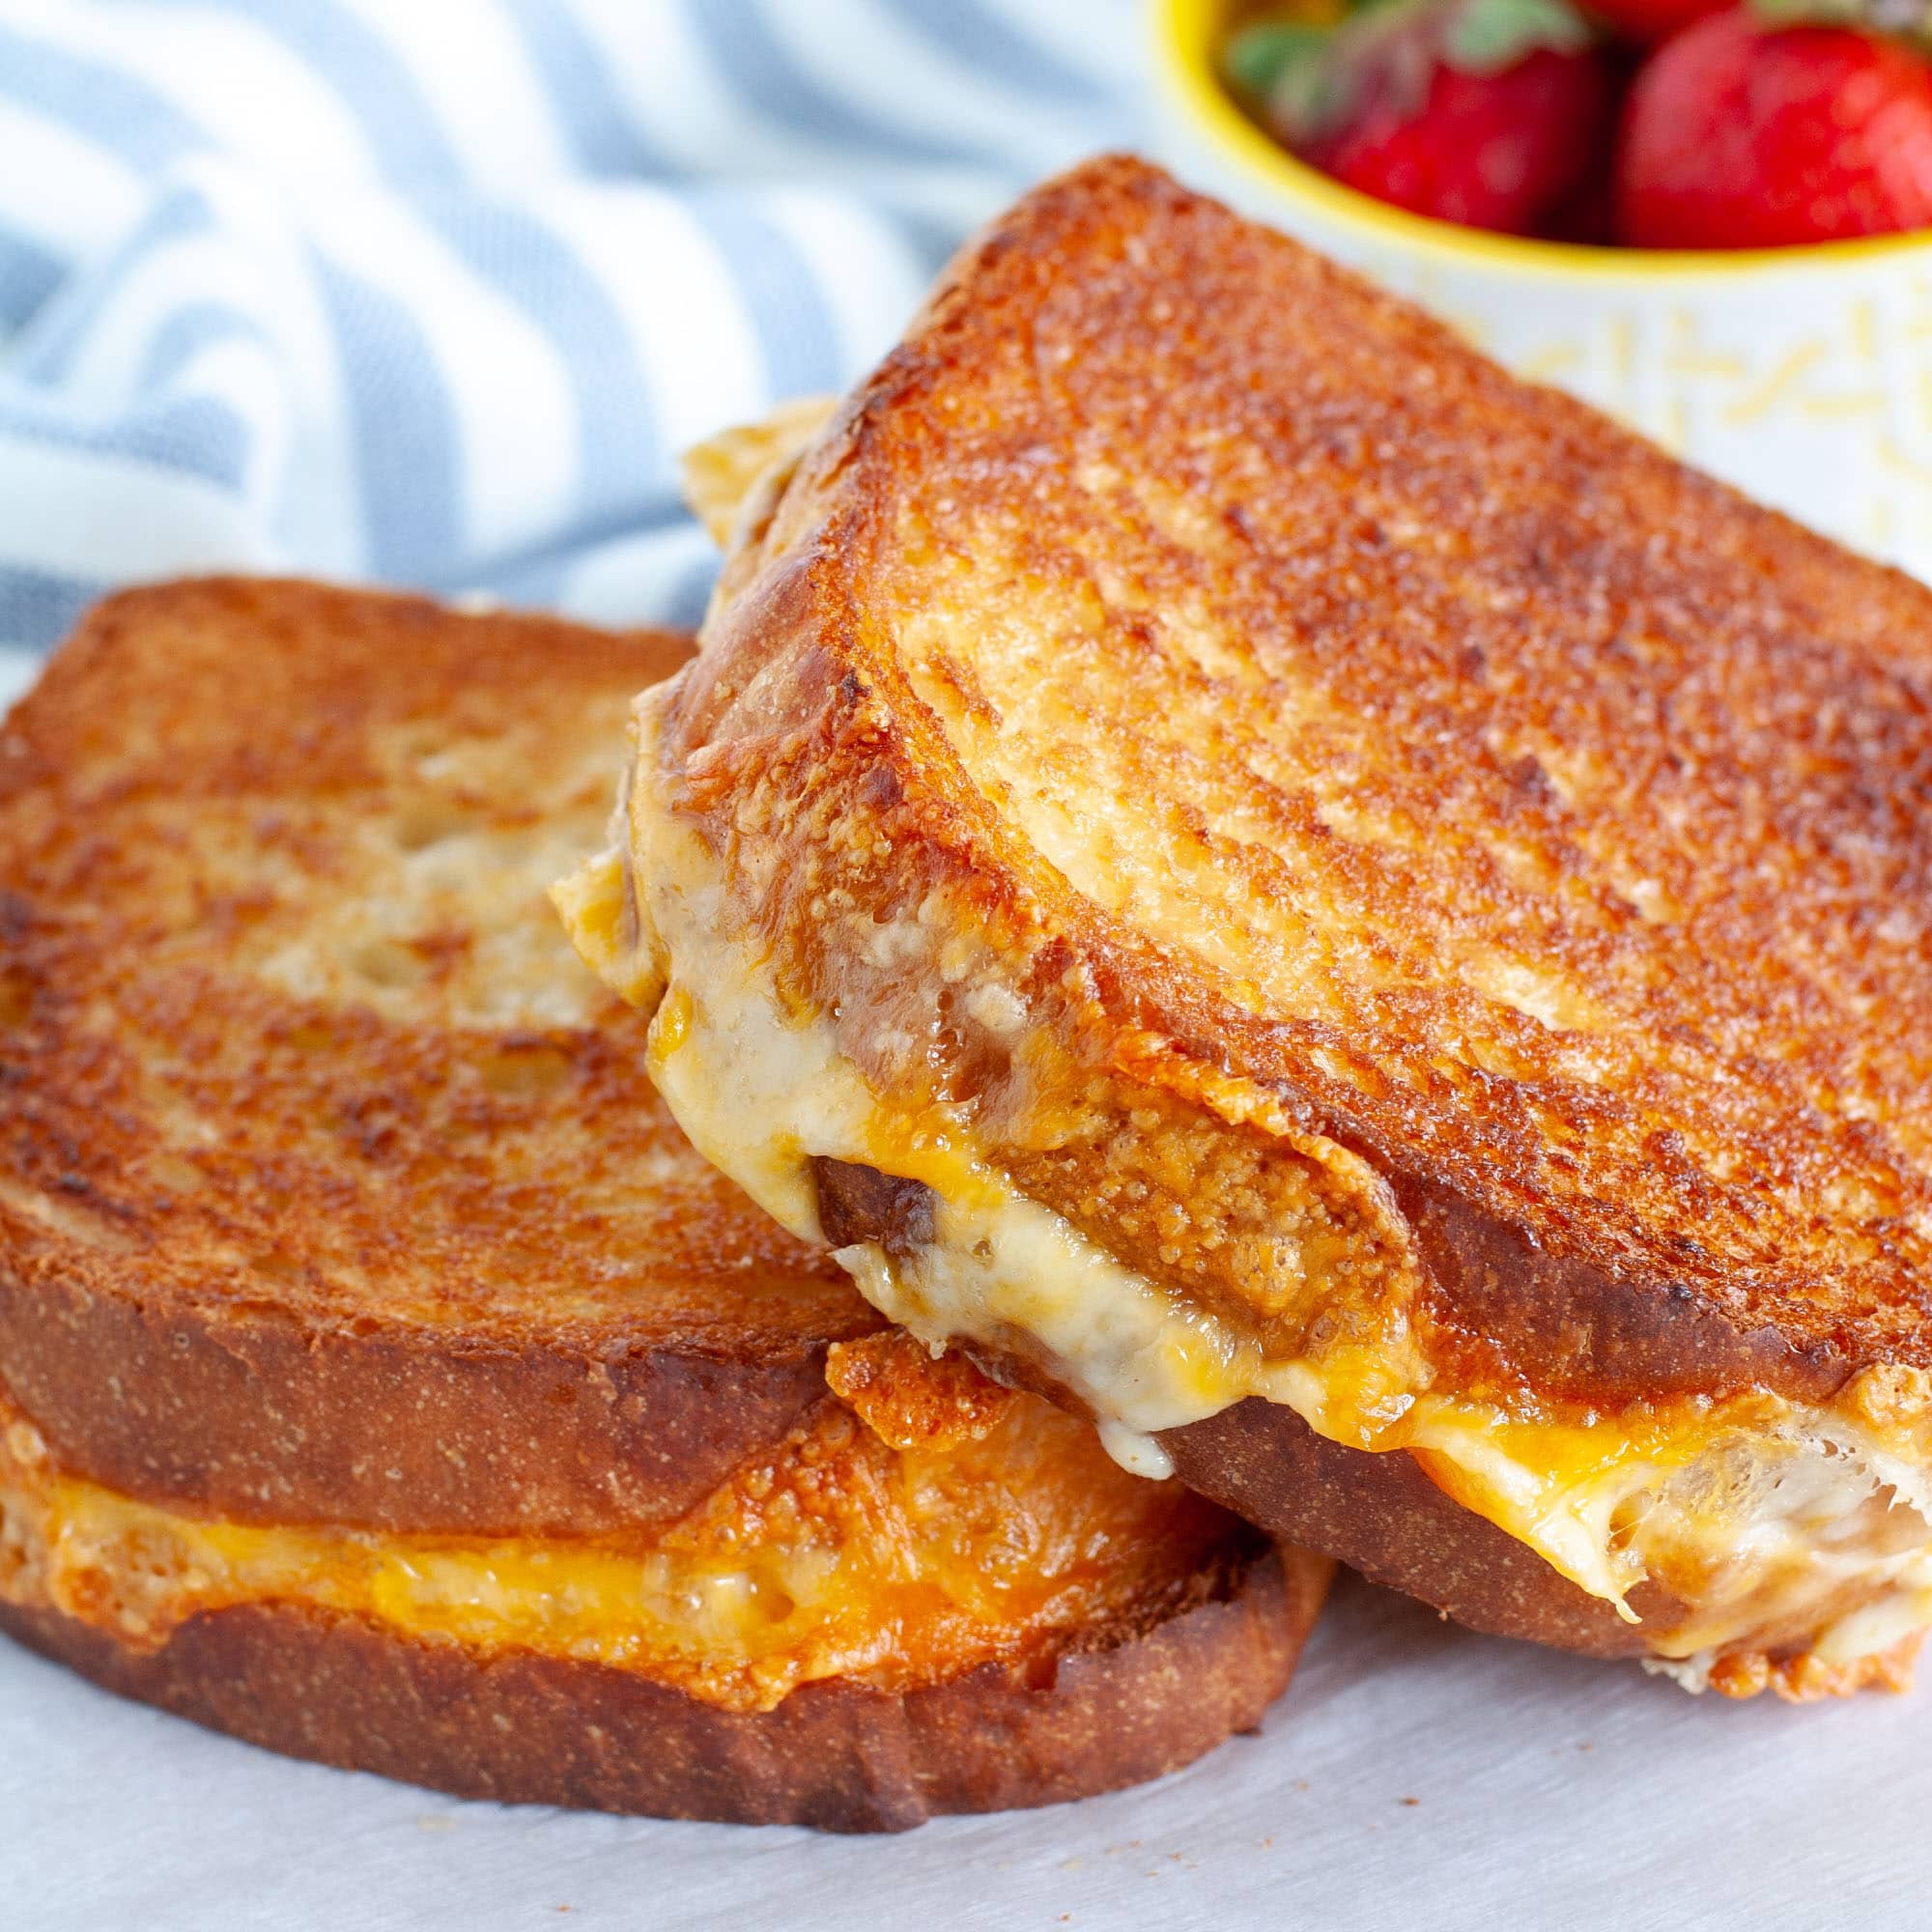 How to Make a Grilled Cheese Sandwich in a Toaster Oven